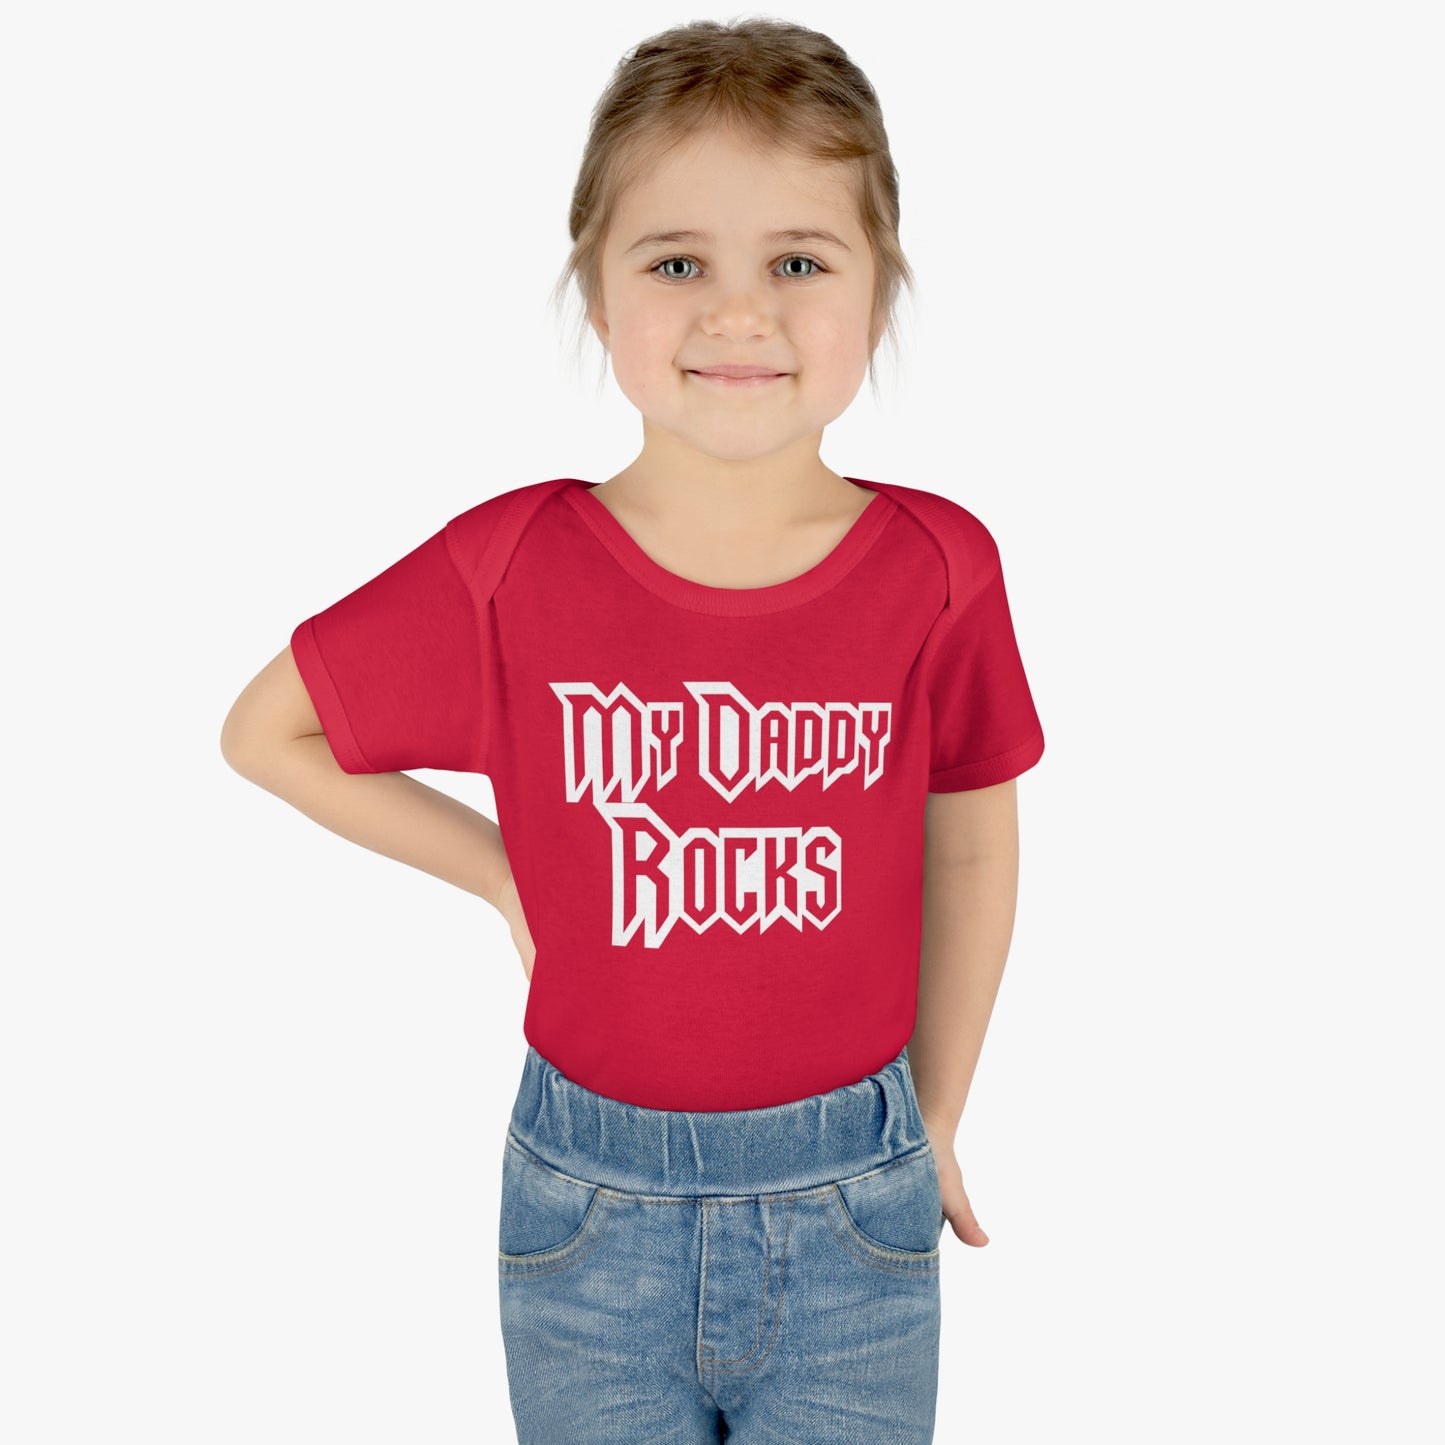 My Daddy Rocks Tee, Infant One Piece, Toddler Bodysuit, Rock and Roll T-Shirt for Baby, Heavy Metal T-Shirt, Musician T-Shirt